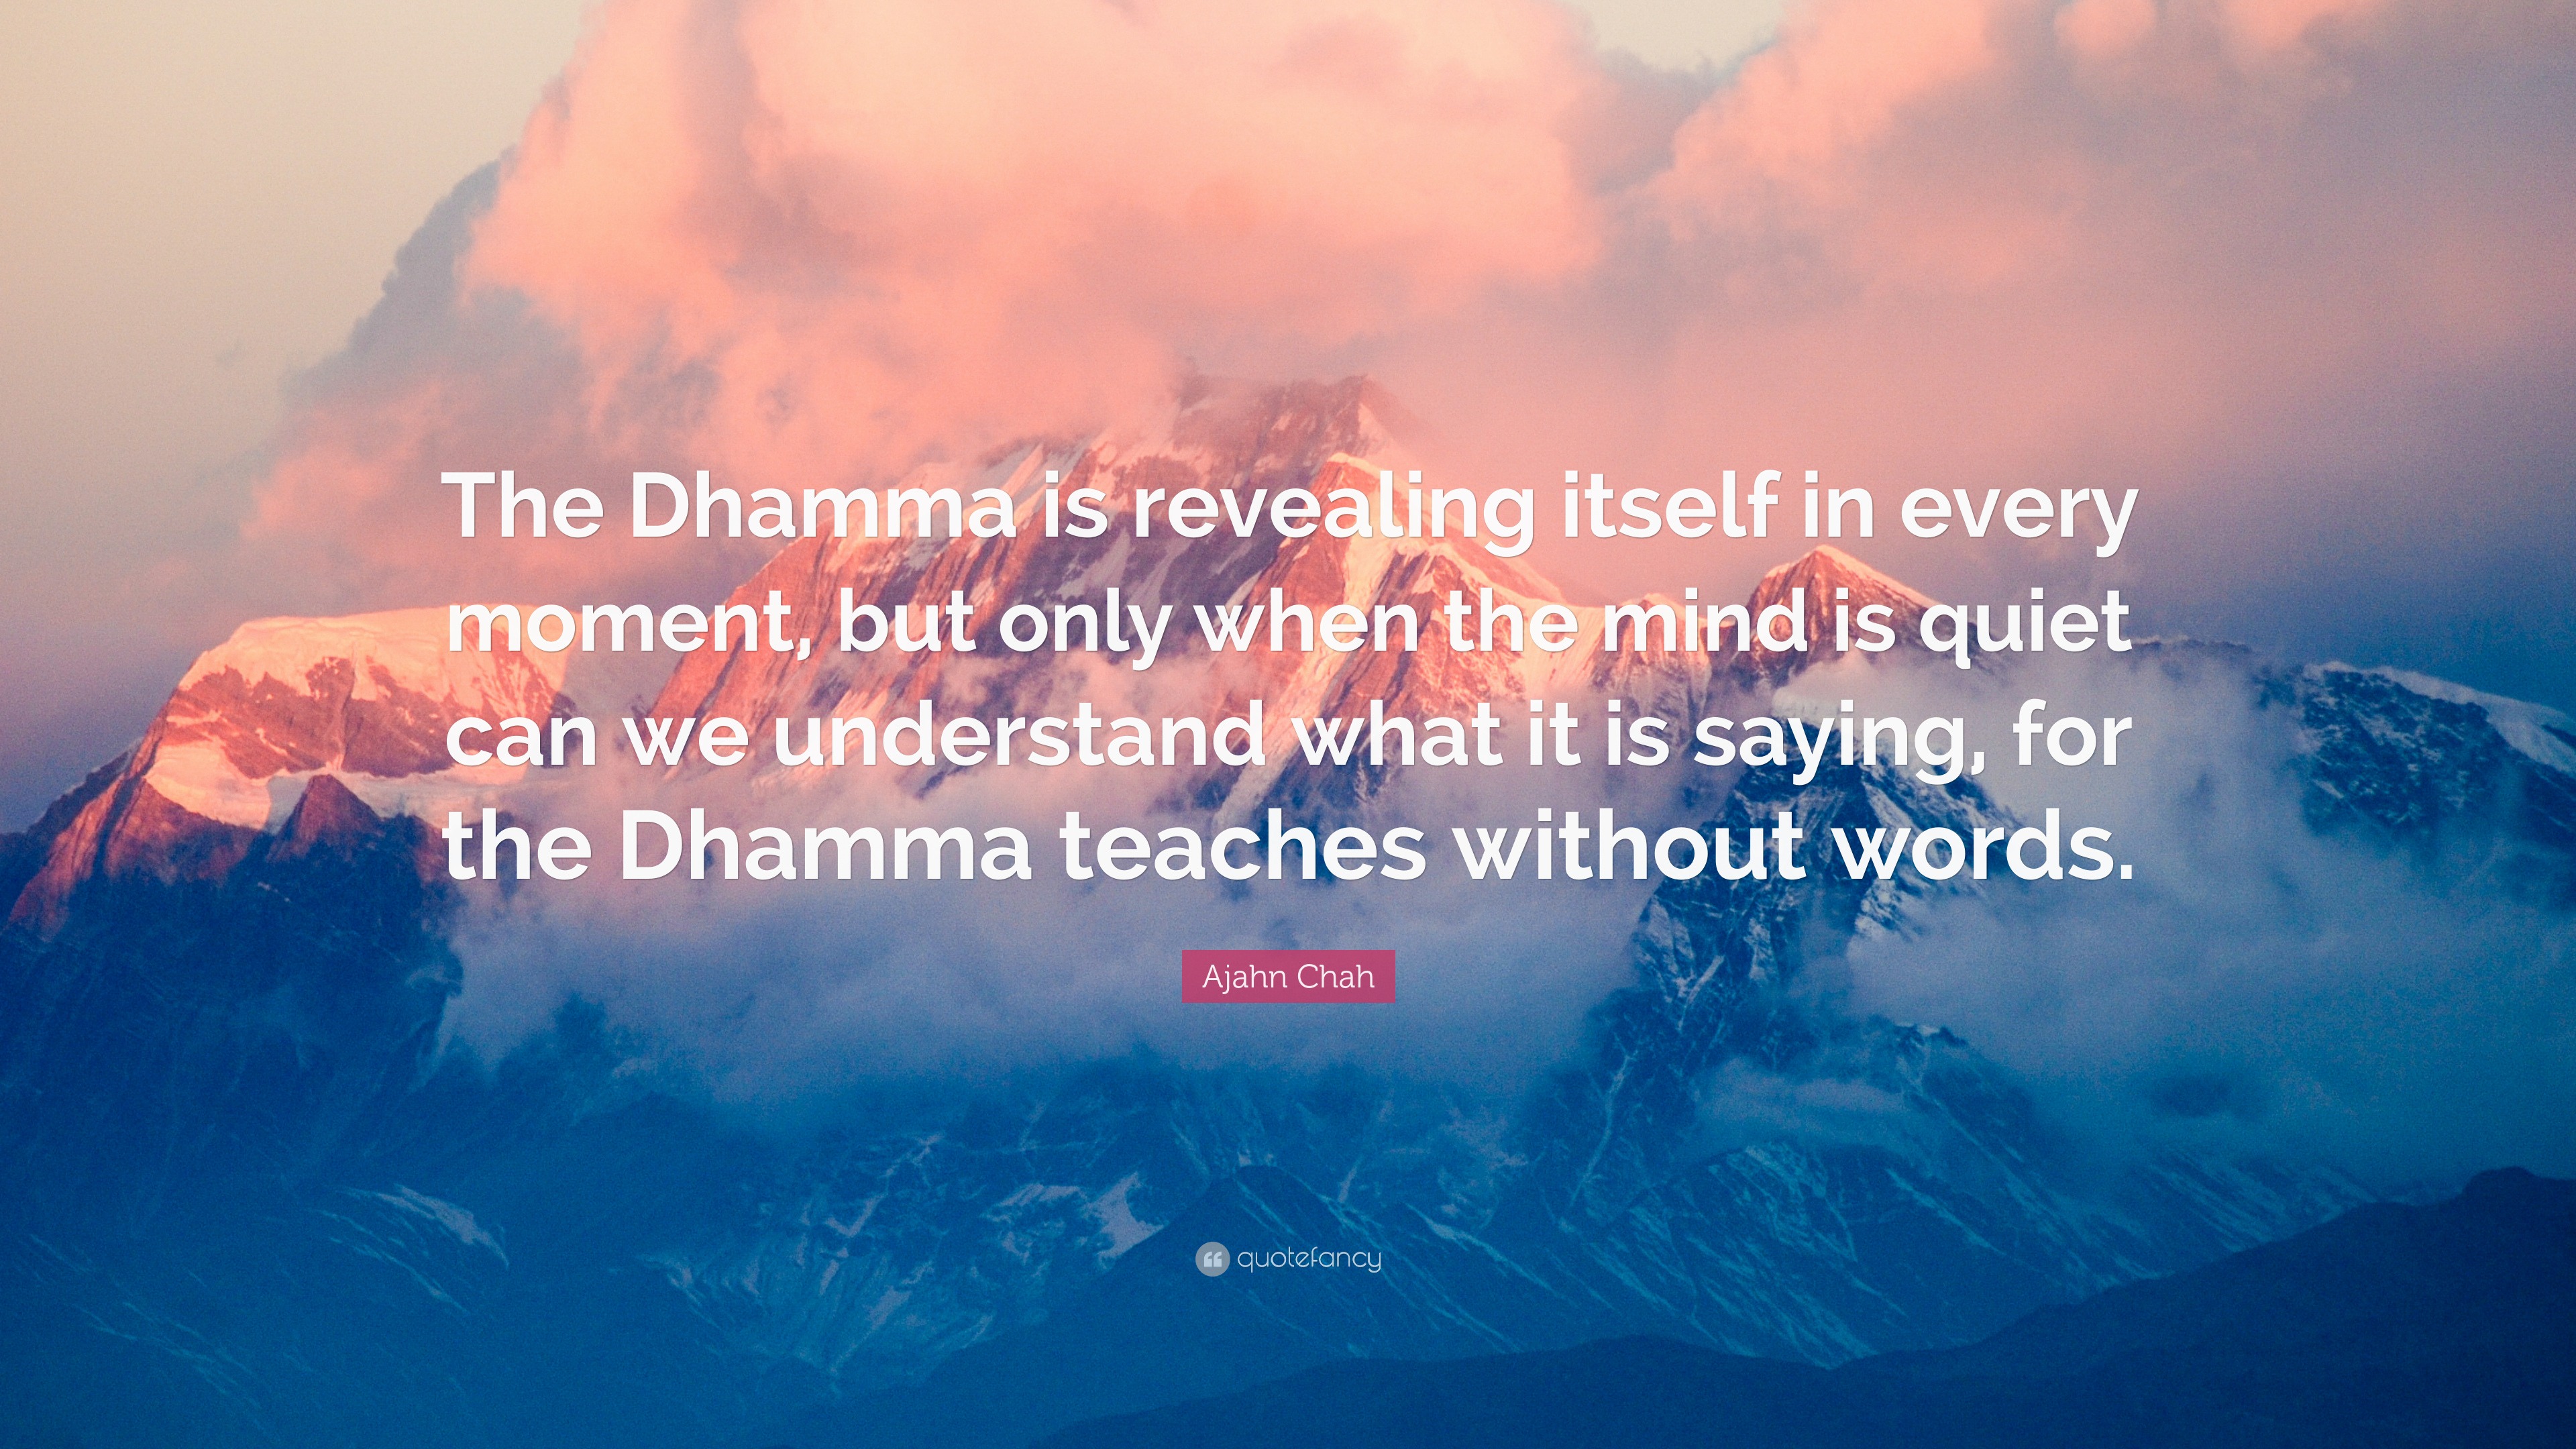 Ajahn Chah Quote: “The Dhamma is revealing itself in every moment, but ...